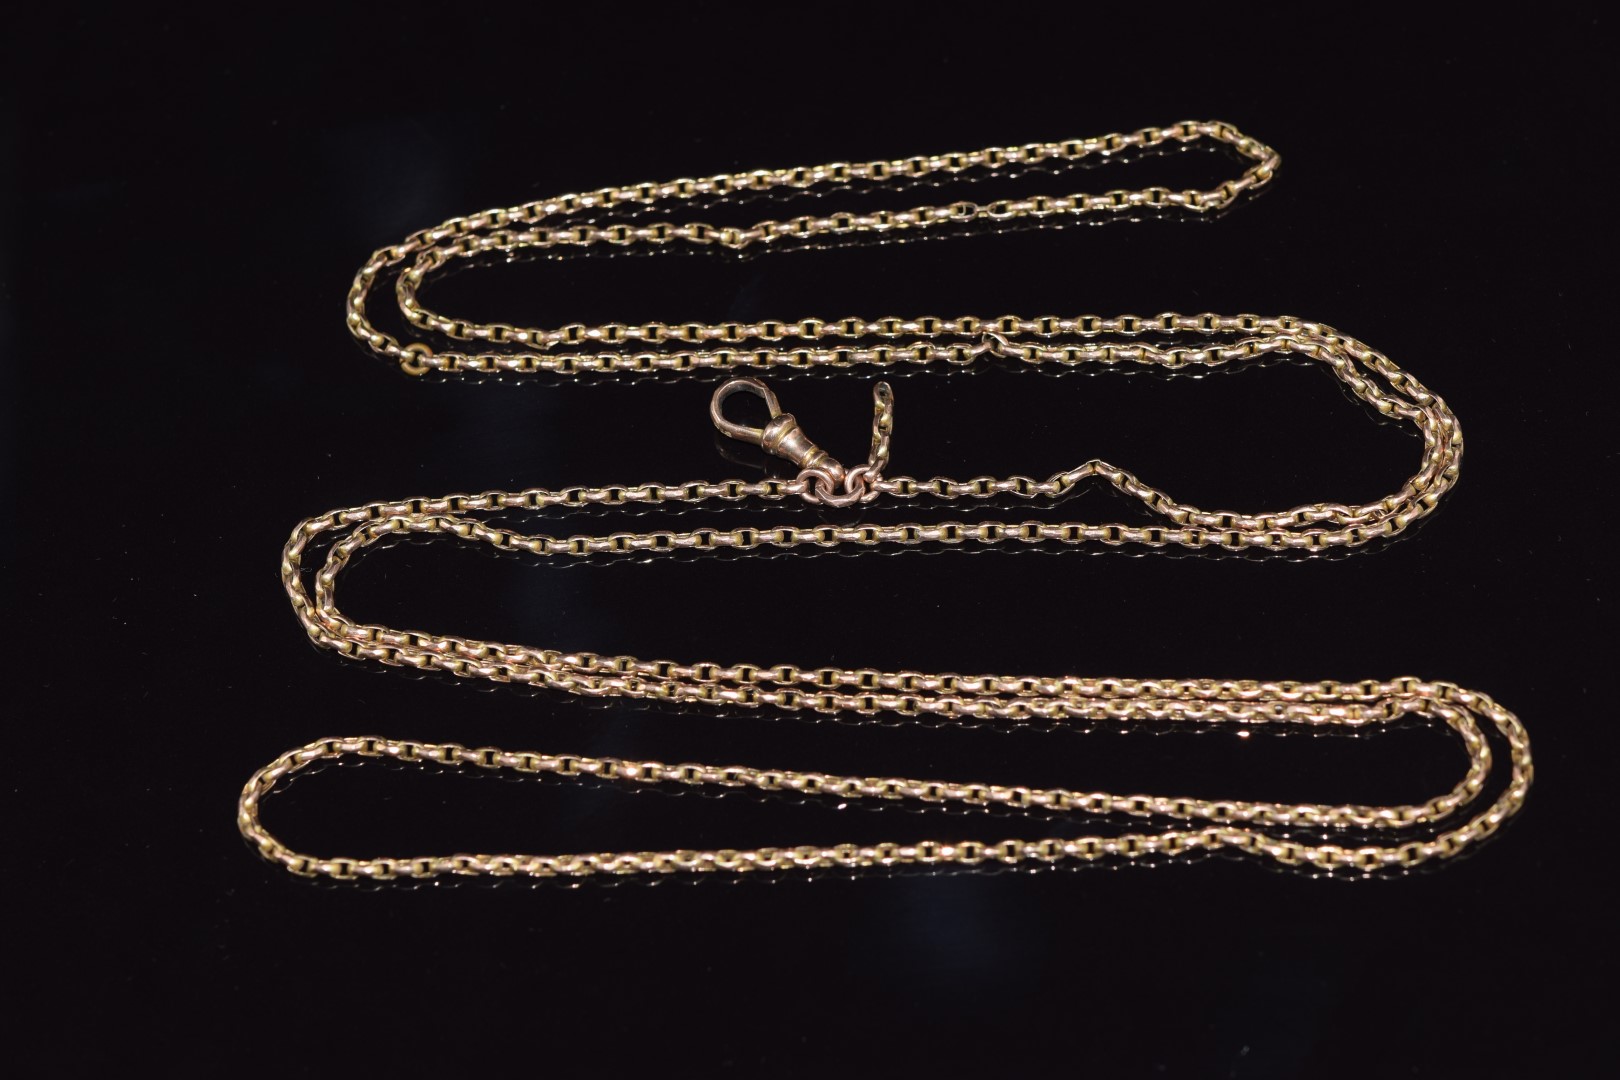 Victorian 9ct gold guard chain made up of oval faceted links, 21.2g, 130cm long